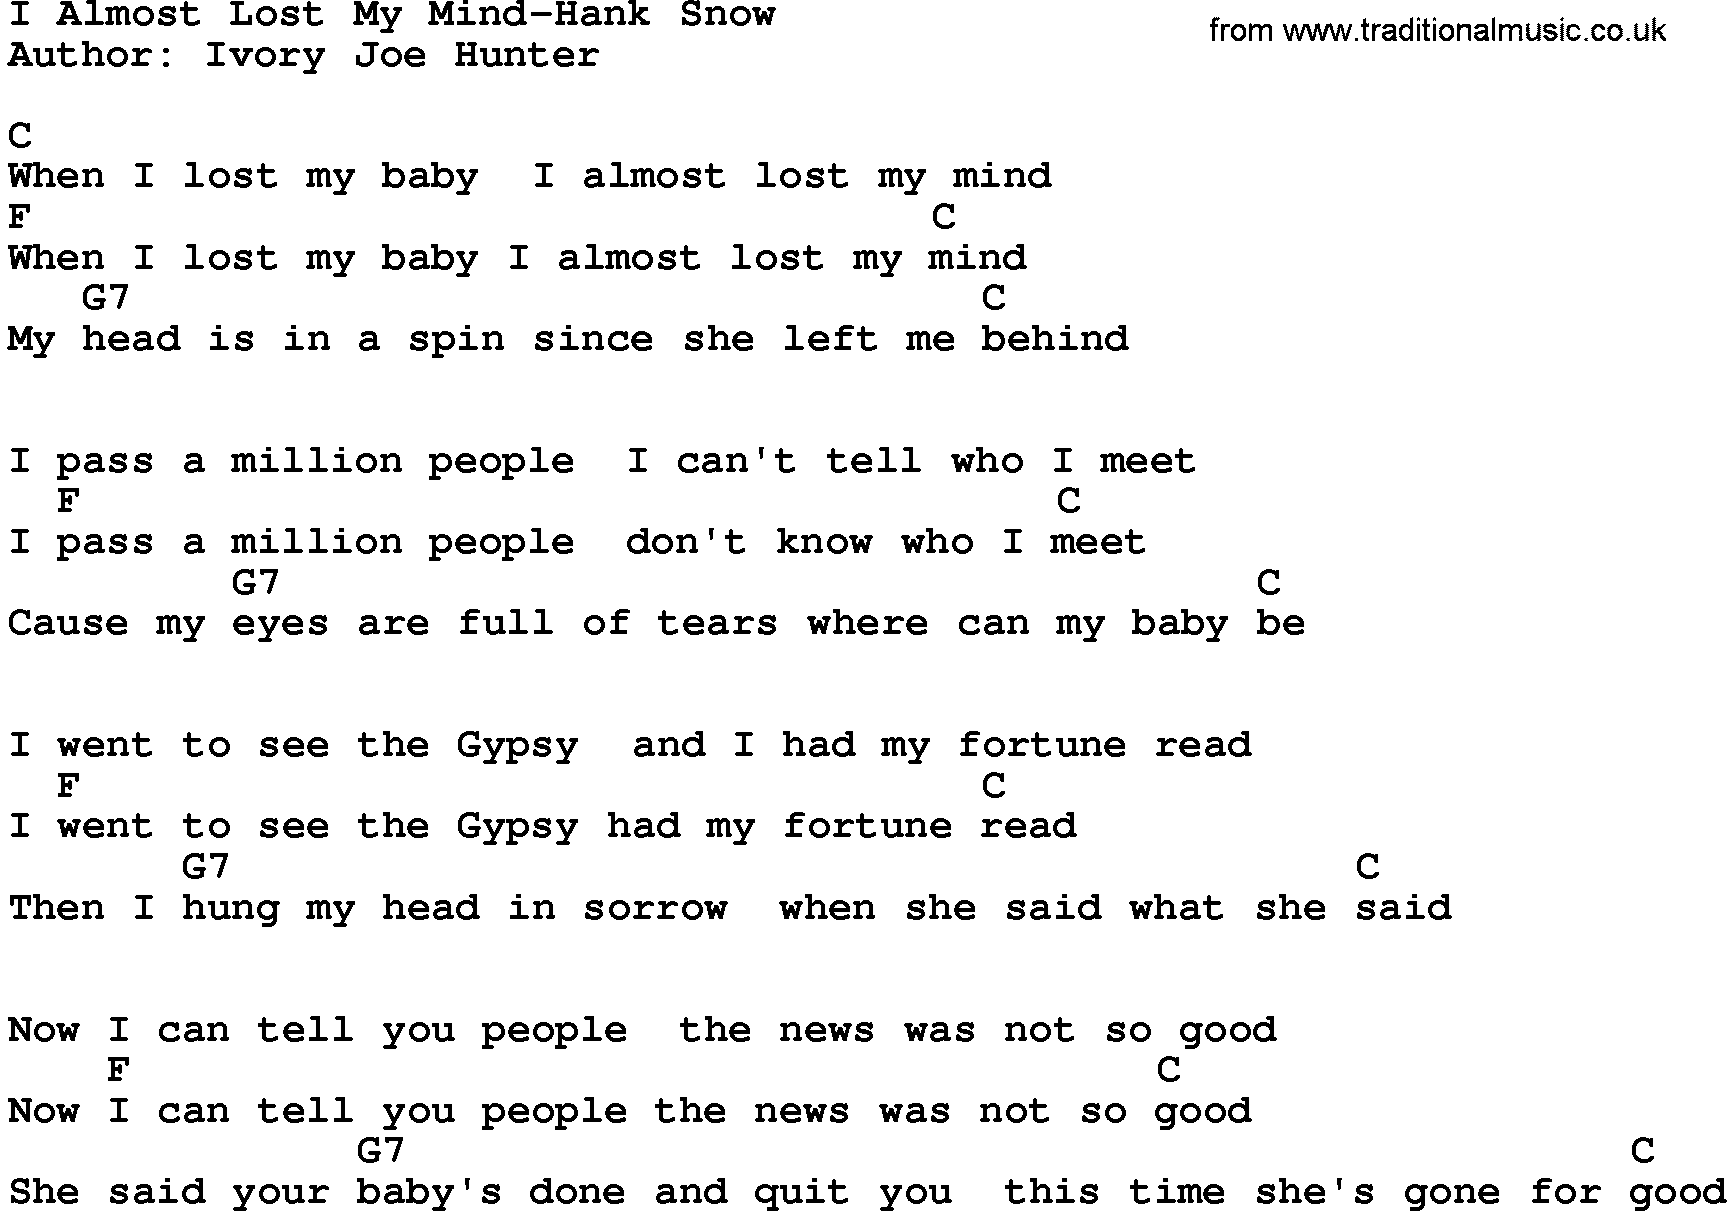 Country music song: I Almost Lost My Mind-Hank Snow lyrics and chords